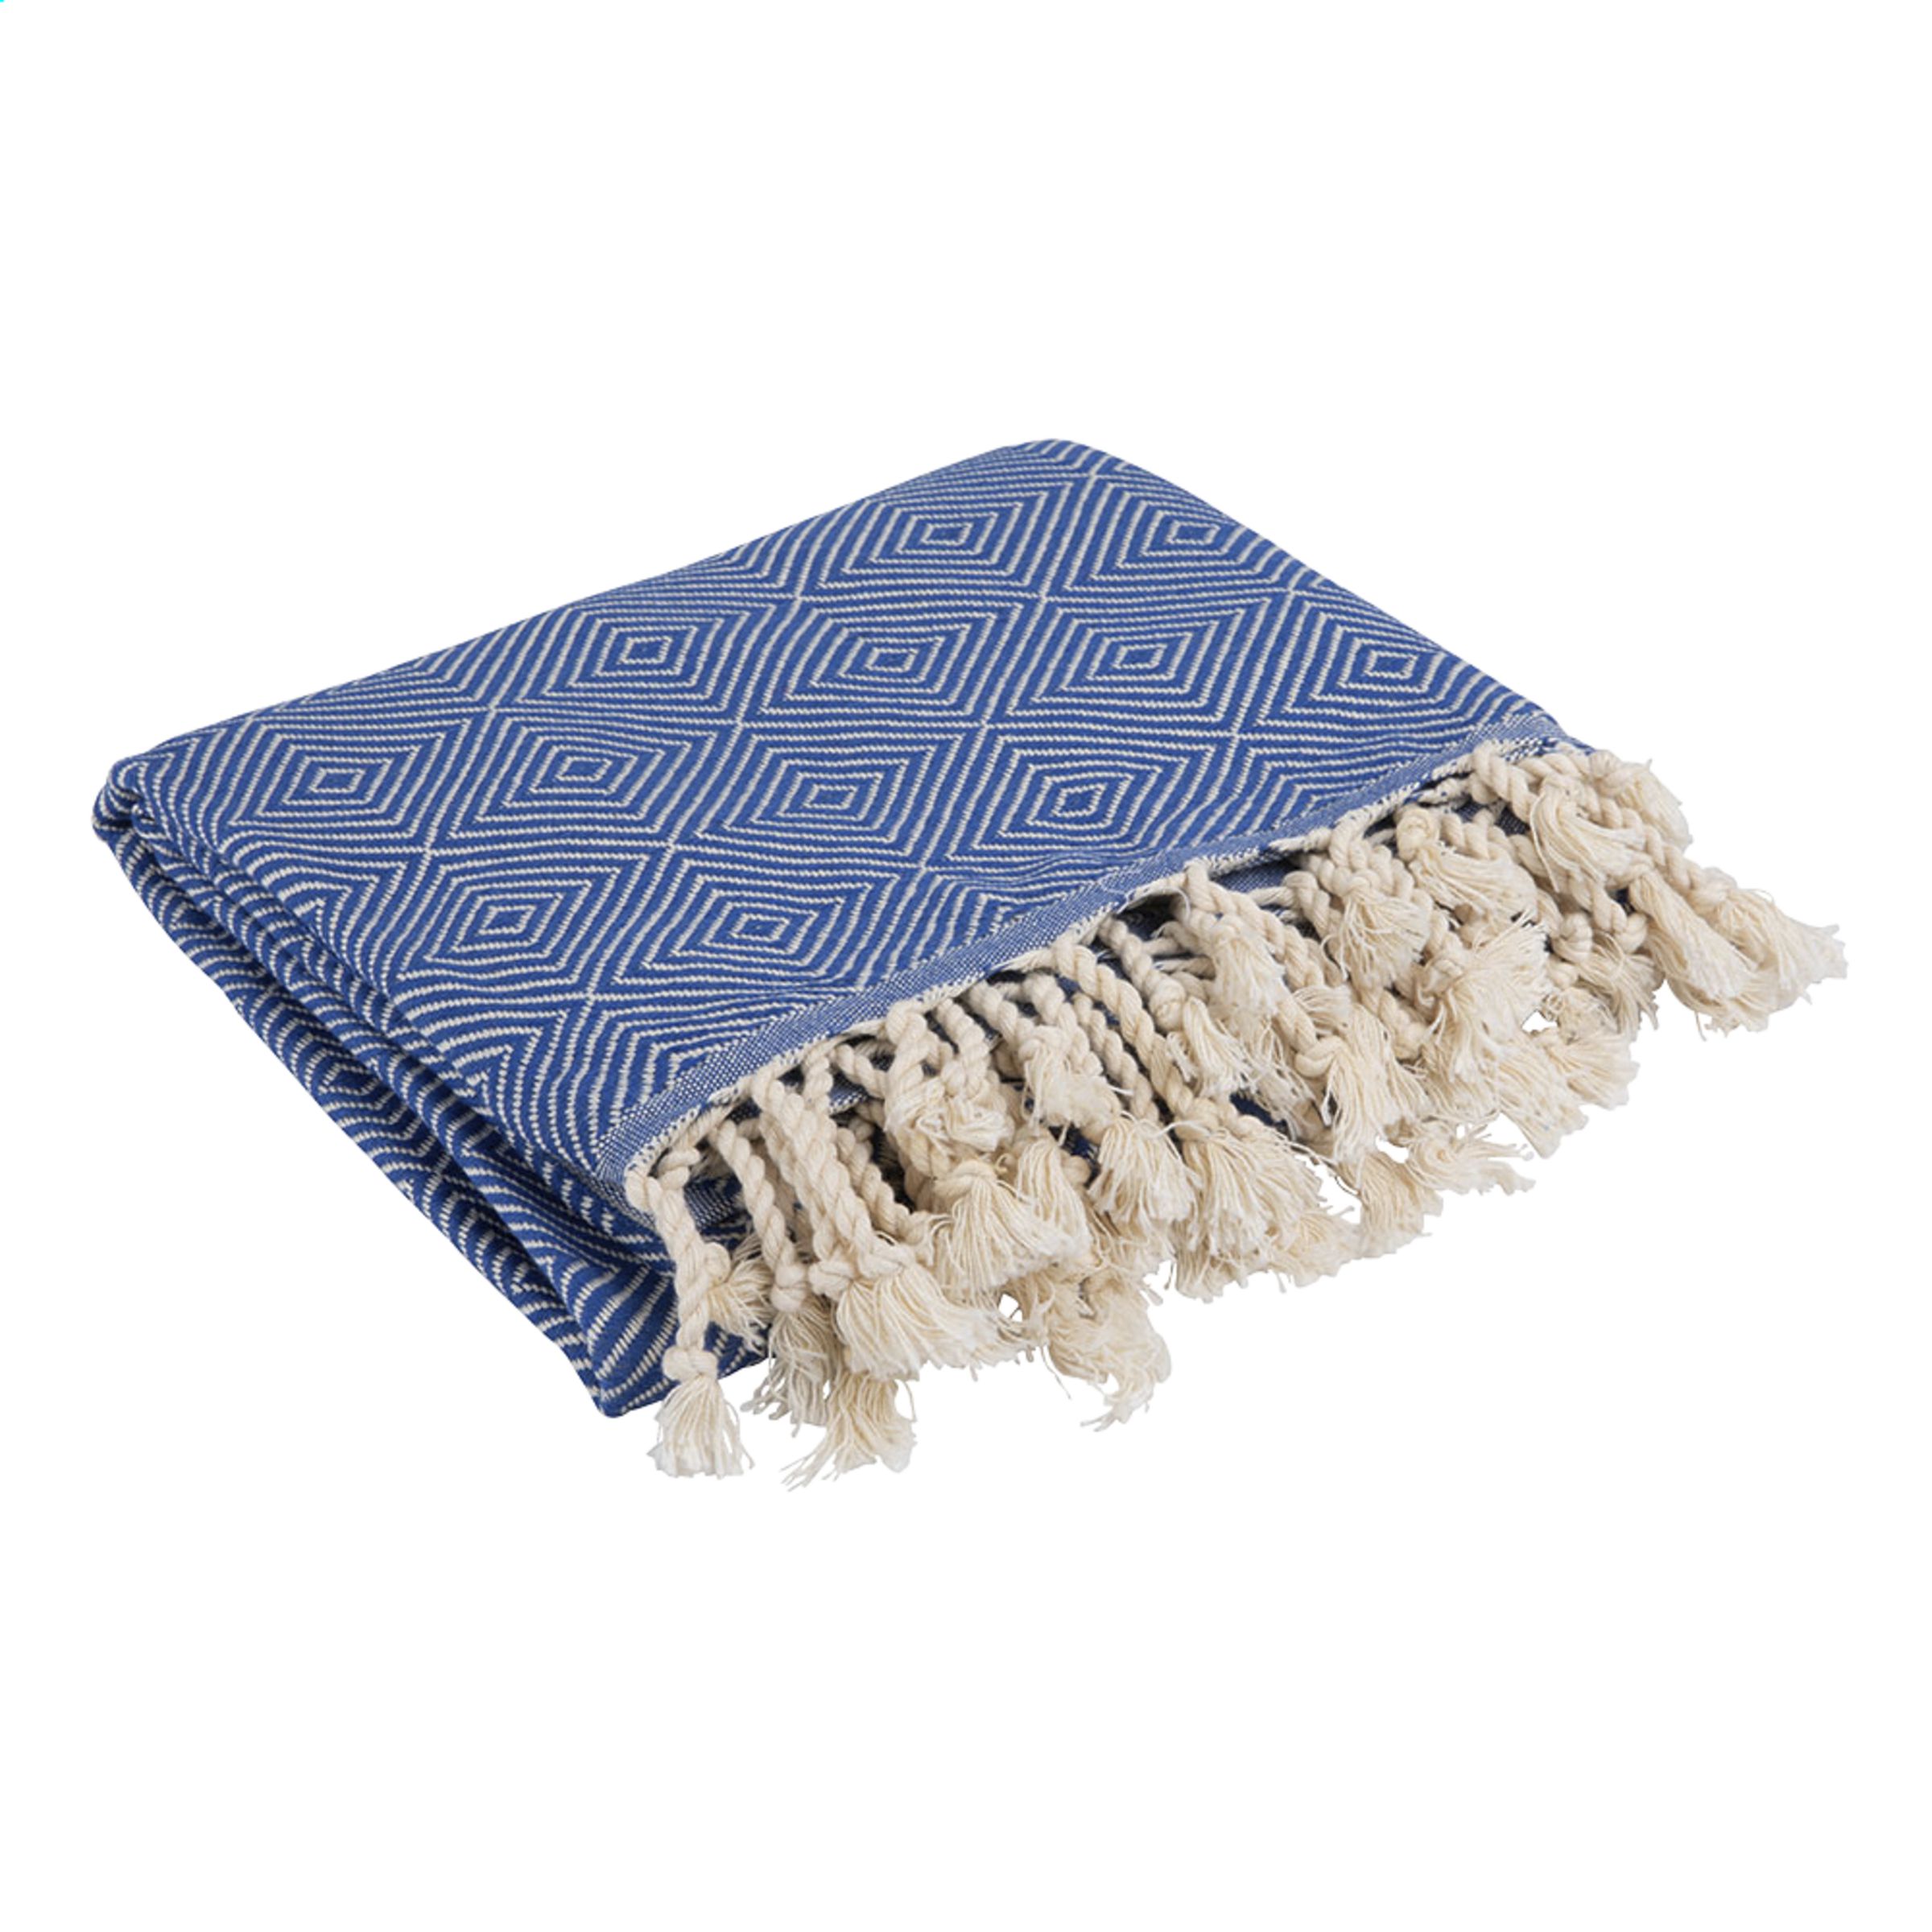 Oxious Harmony Towel - Bacton - New Forest